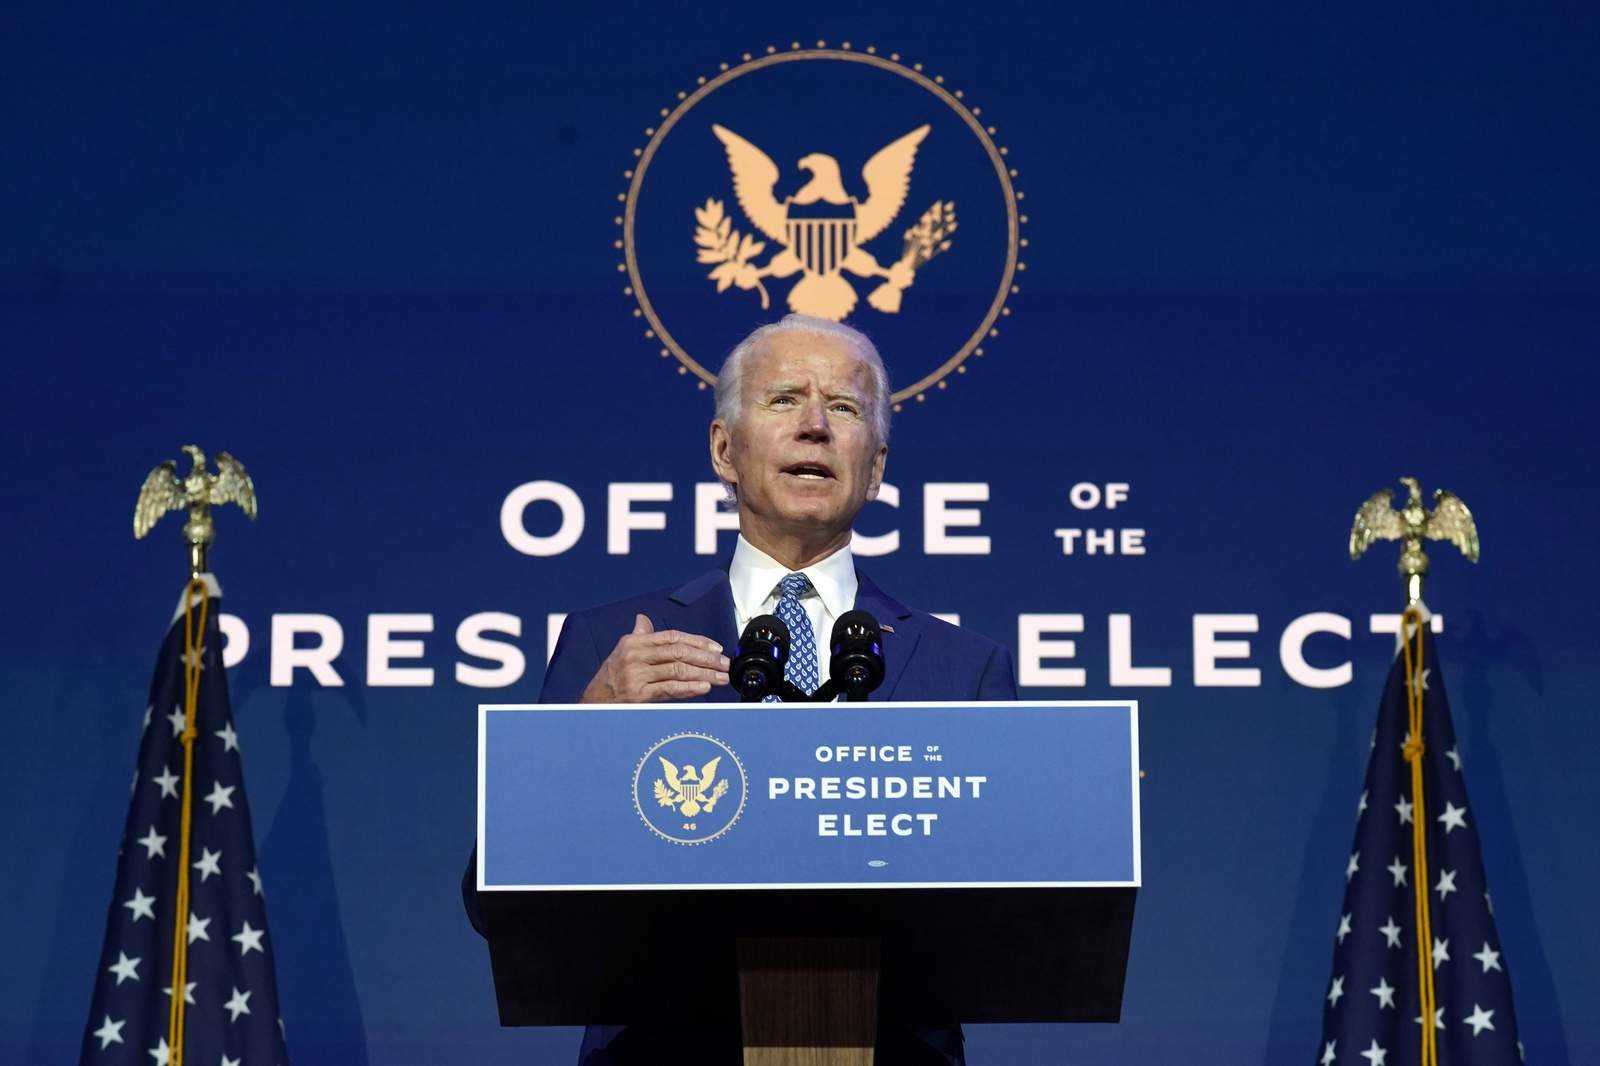 President-elect Joe Biden unveils plans for addressing the COVID-19 pandemic